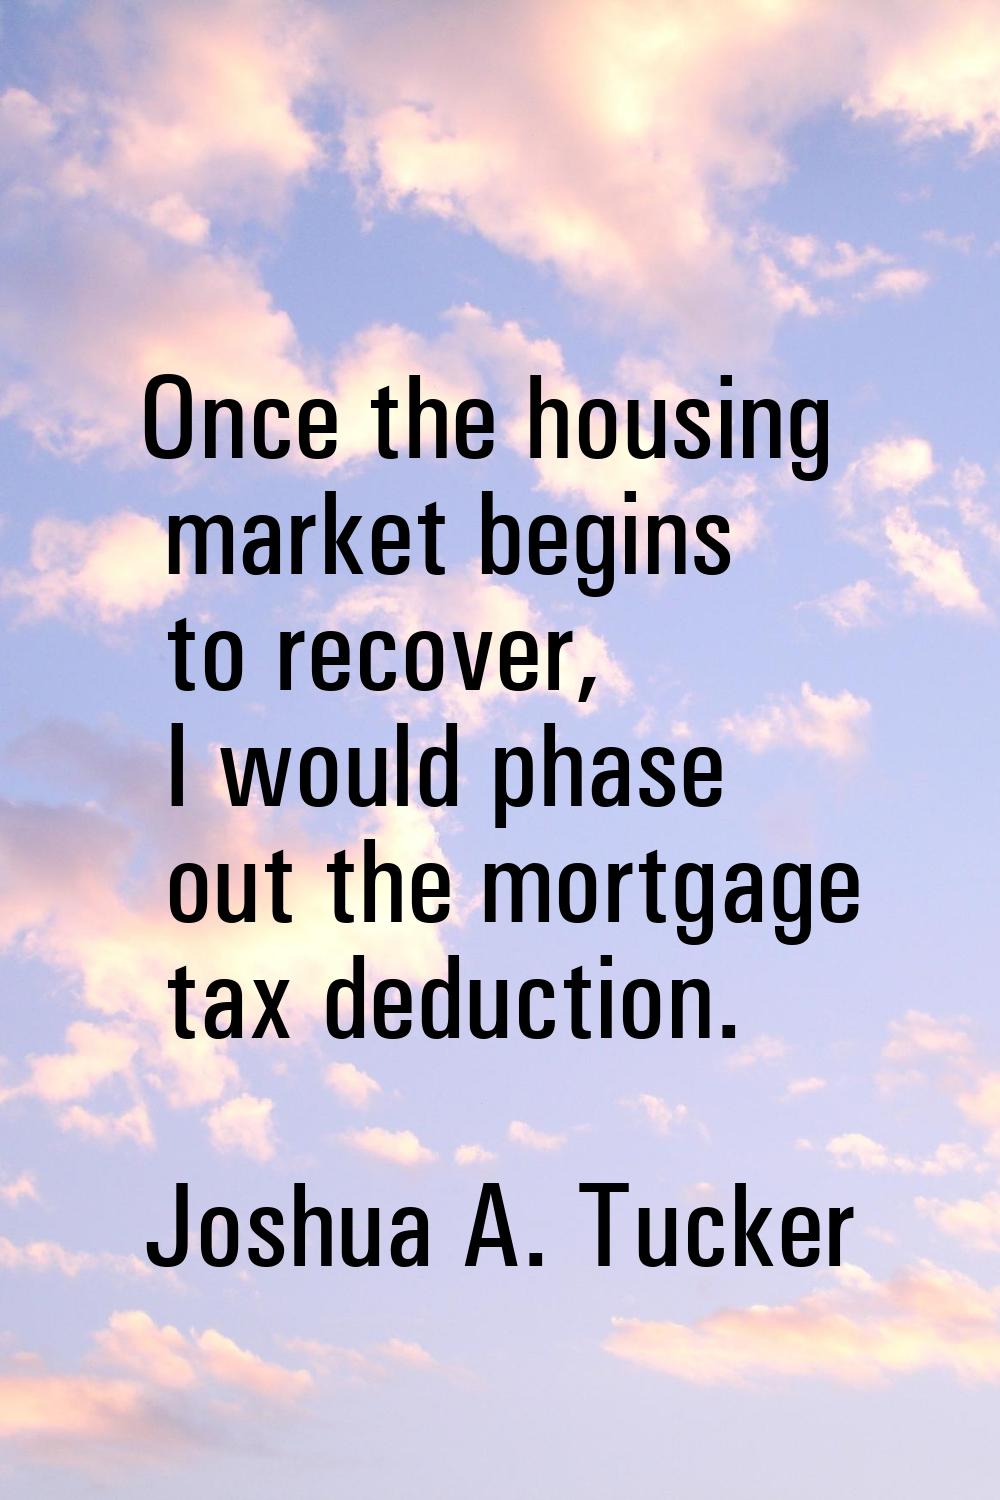 Once the housing market begins to recover, I would phase out the mortgage tax deduction.